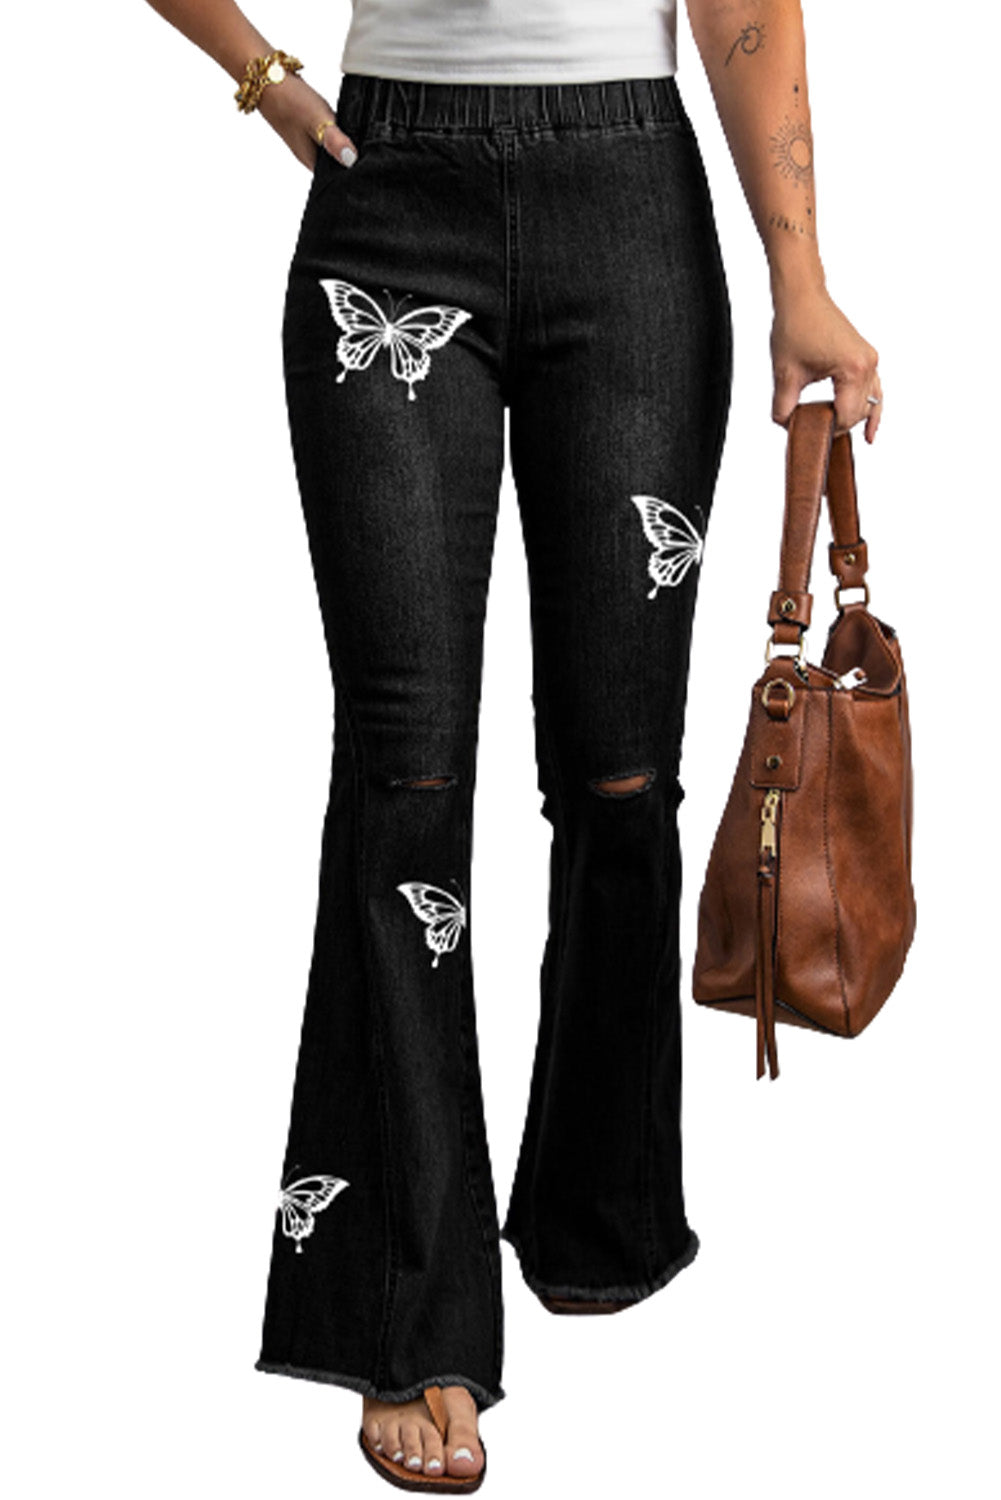 Butterfly Print Distressed Elastic High Waist Flare Jeans